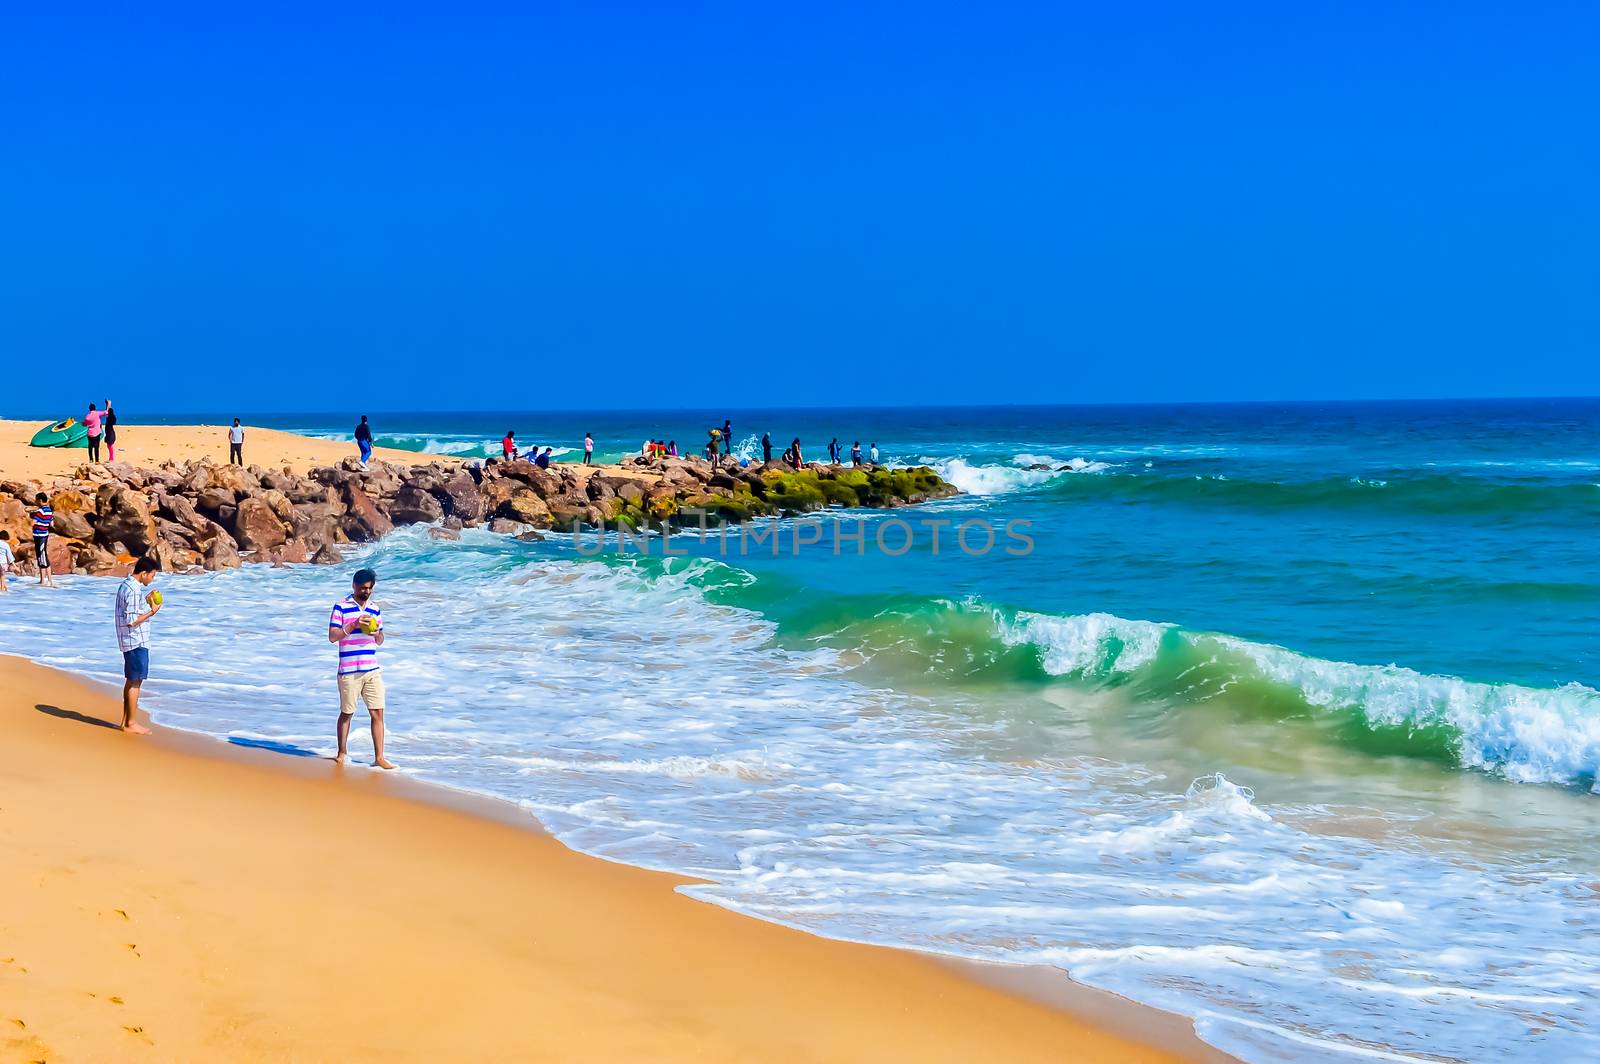 Photograph of Goa Sea Beach taken in Christmas Holiday during New Year celebration in landscape style Useful for background screen saver e-cards website banner usage Travel landscape new year Concept